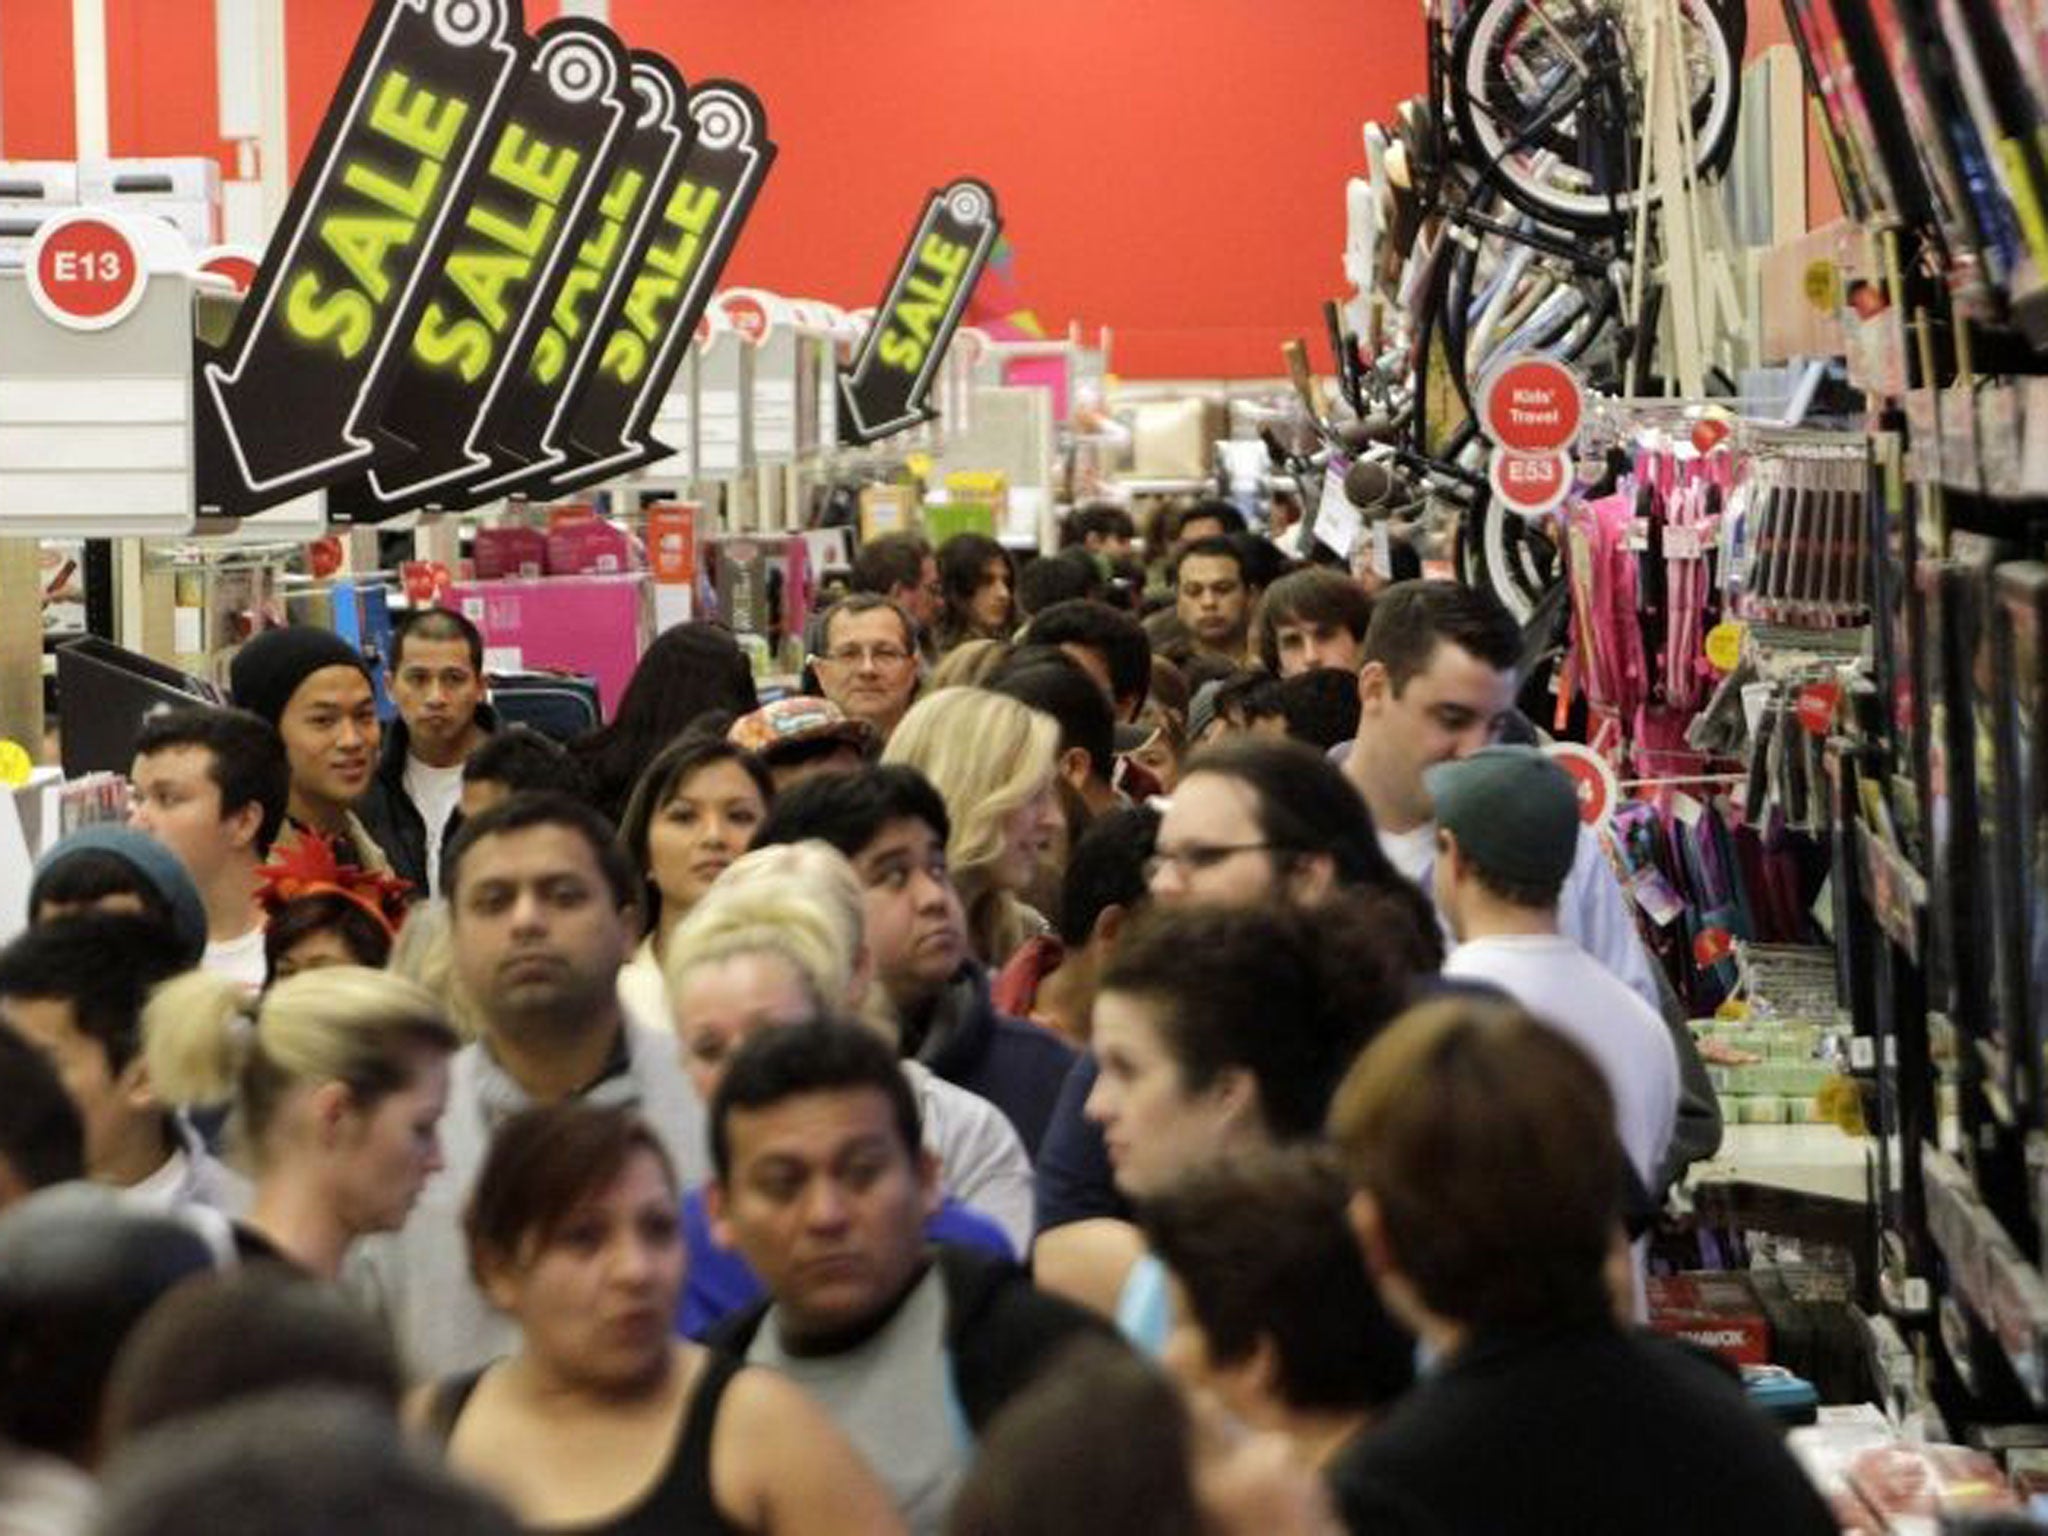 The traditional shopping frenzy takes place the day after Thanksgiving in the US and marks the beginning of the Christmas shopping season, with an estimated 147 million people in the US expected to hit the shops.